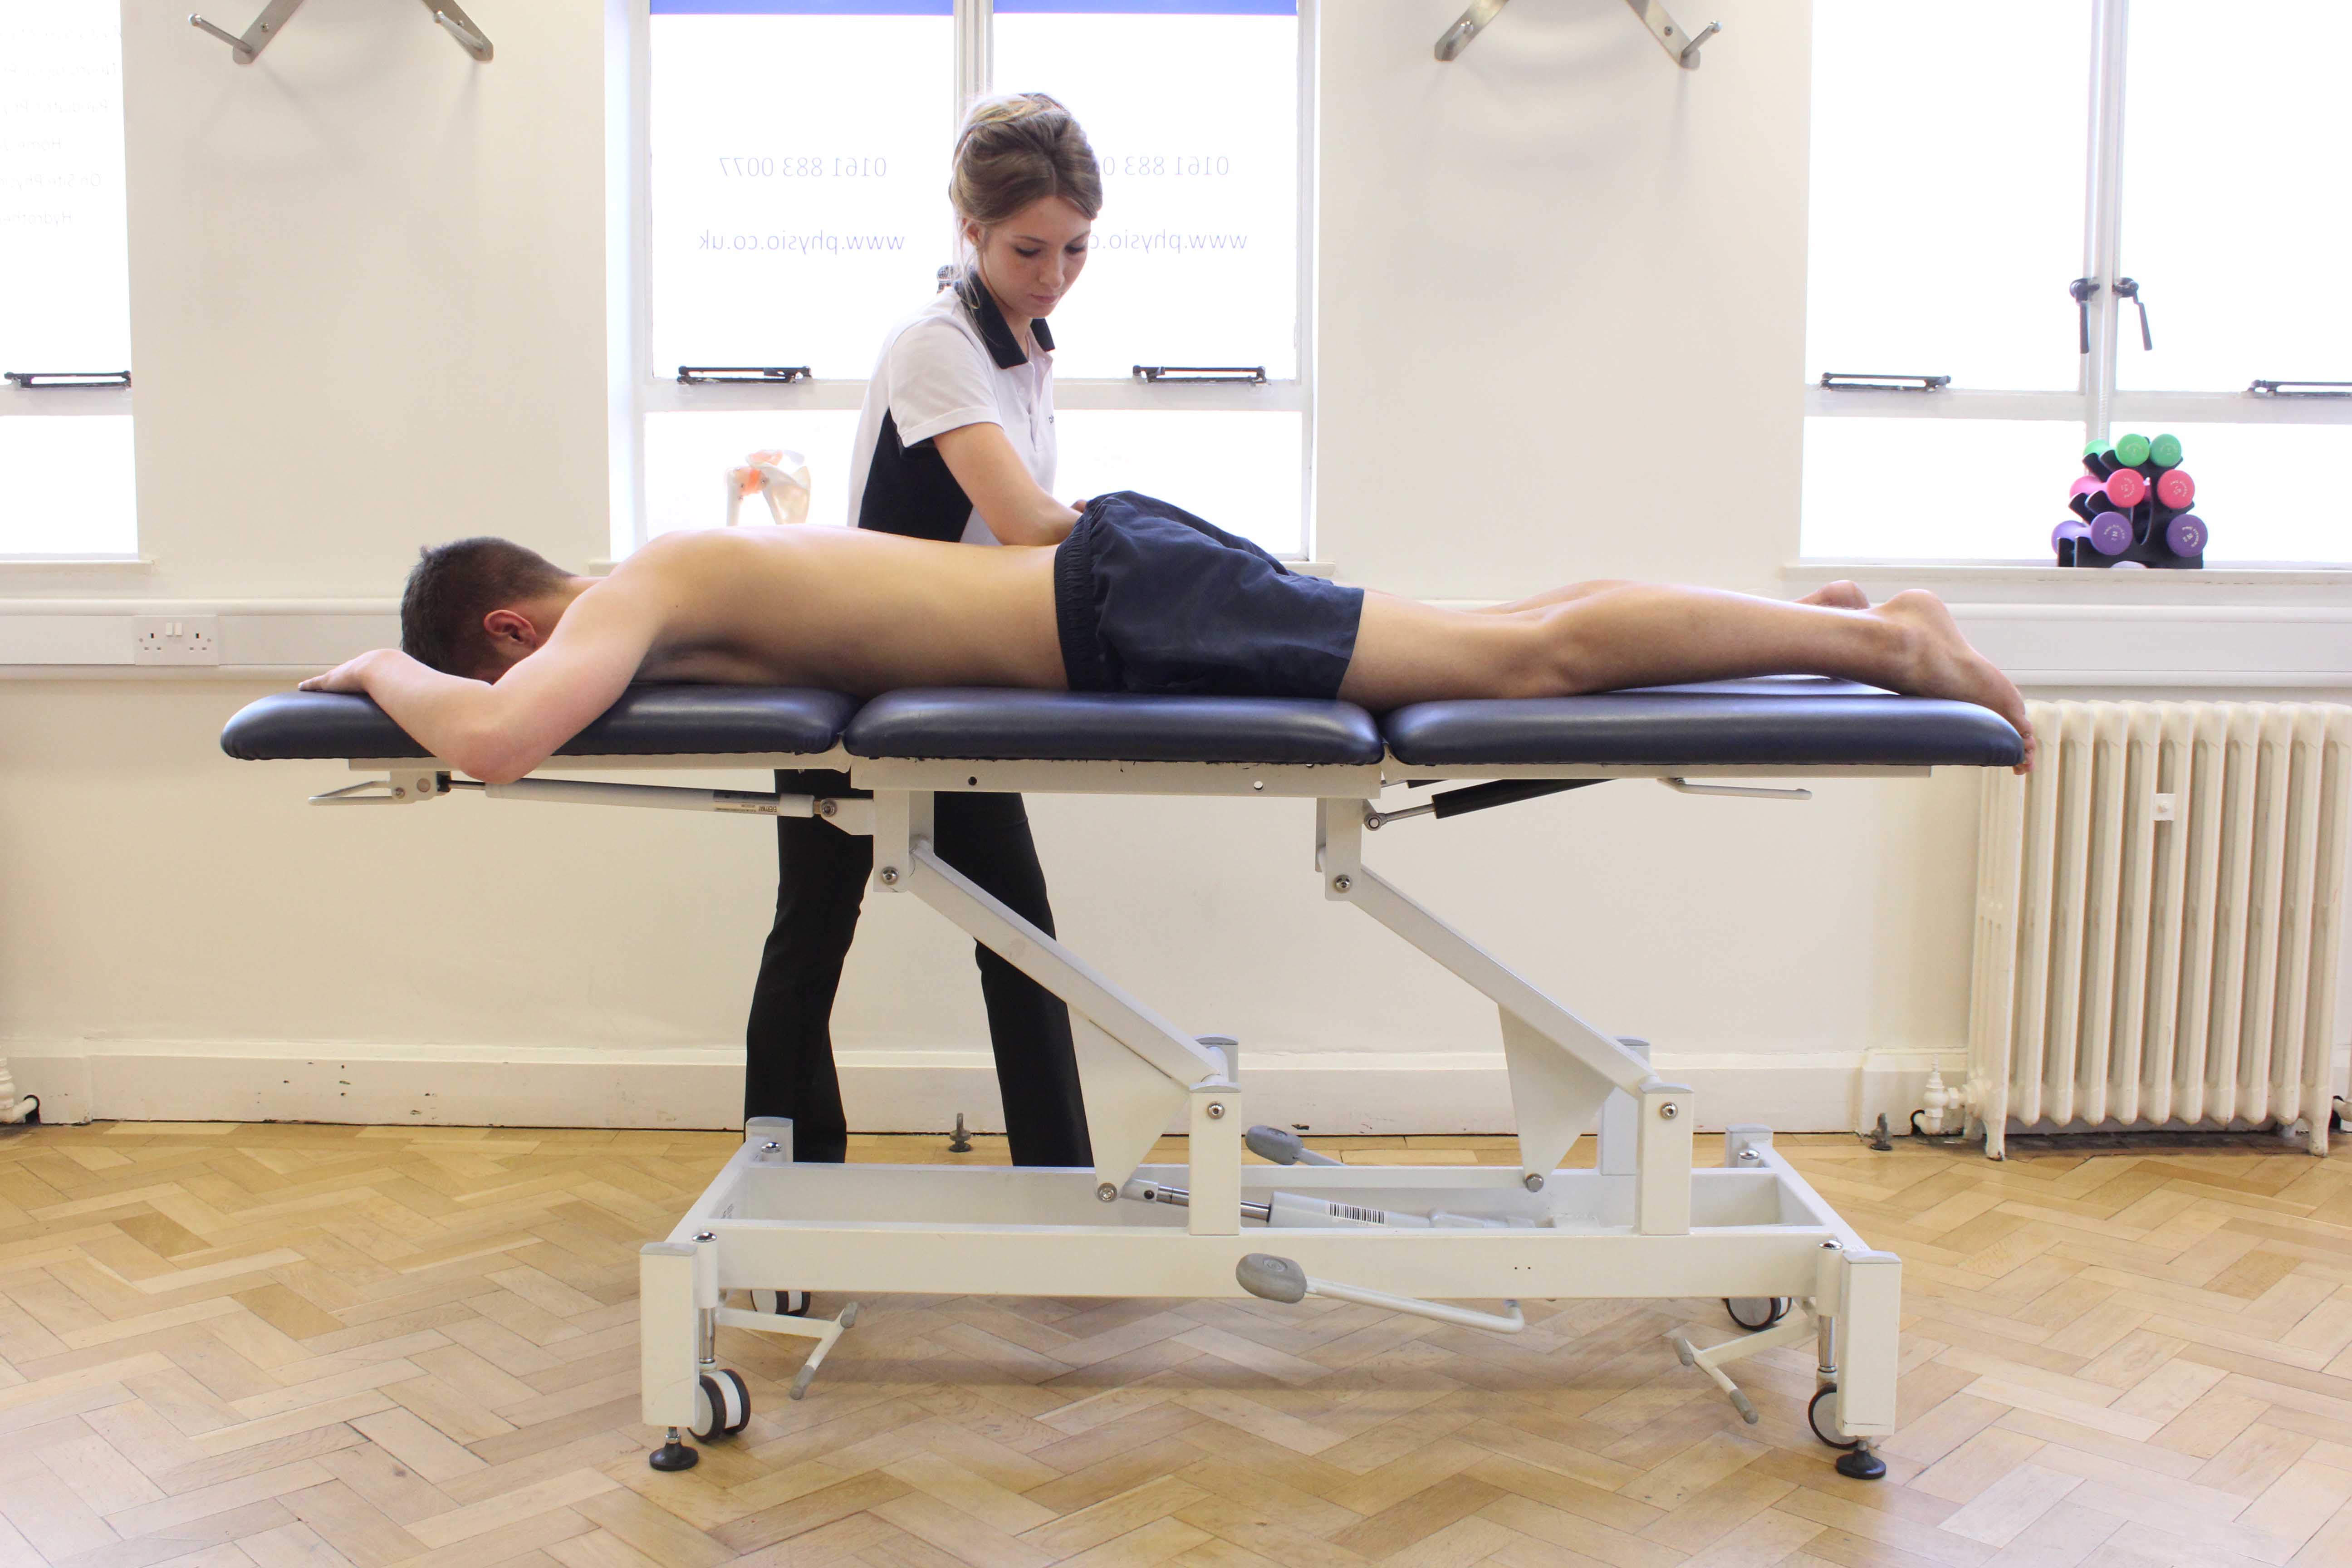 Deep tissue massage of the lower back by a specialist massage therapist